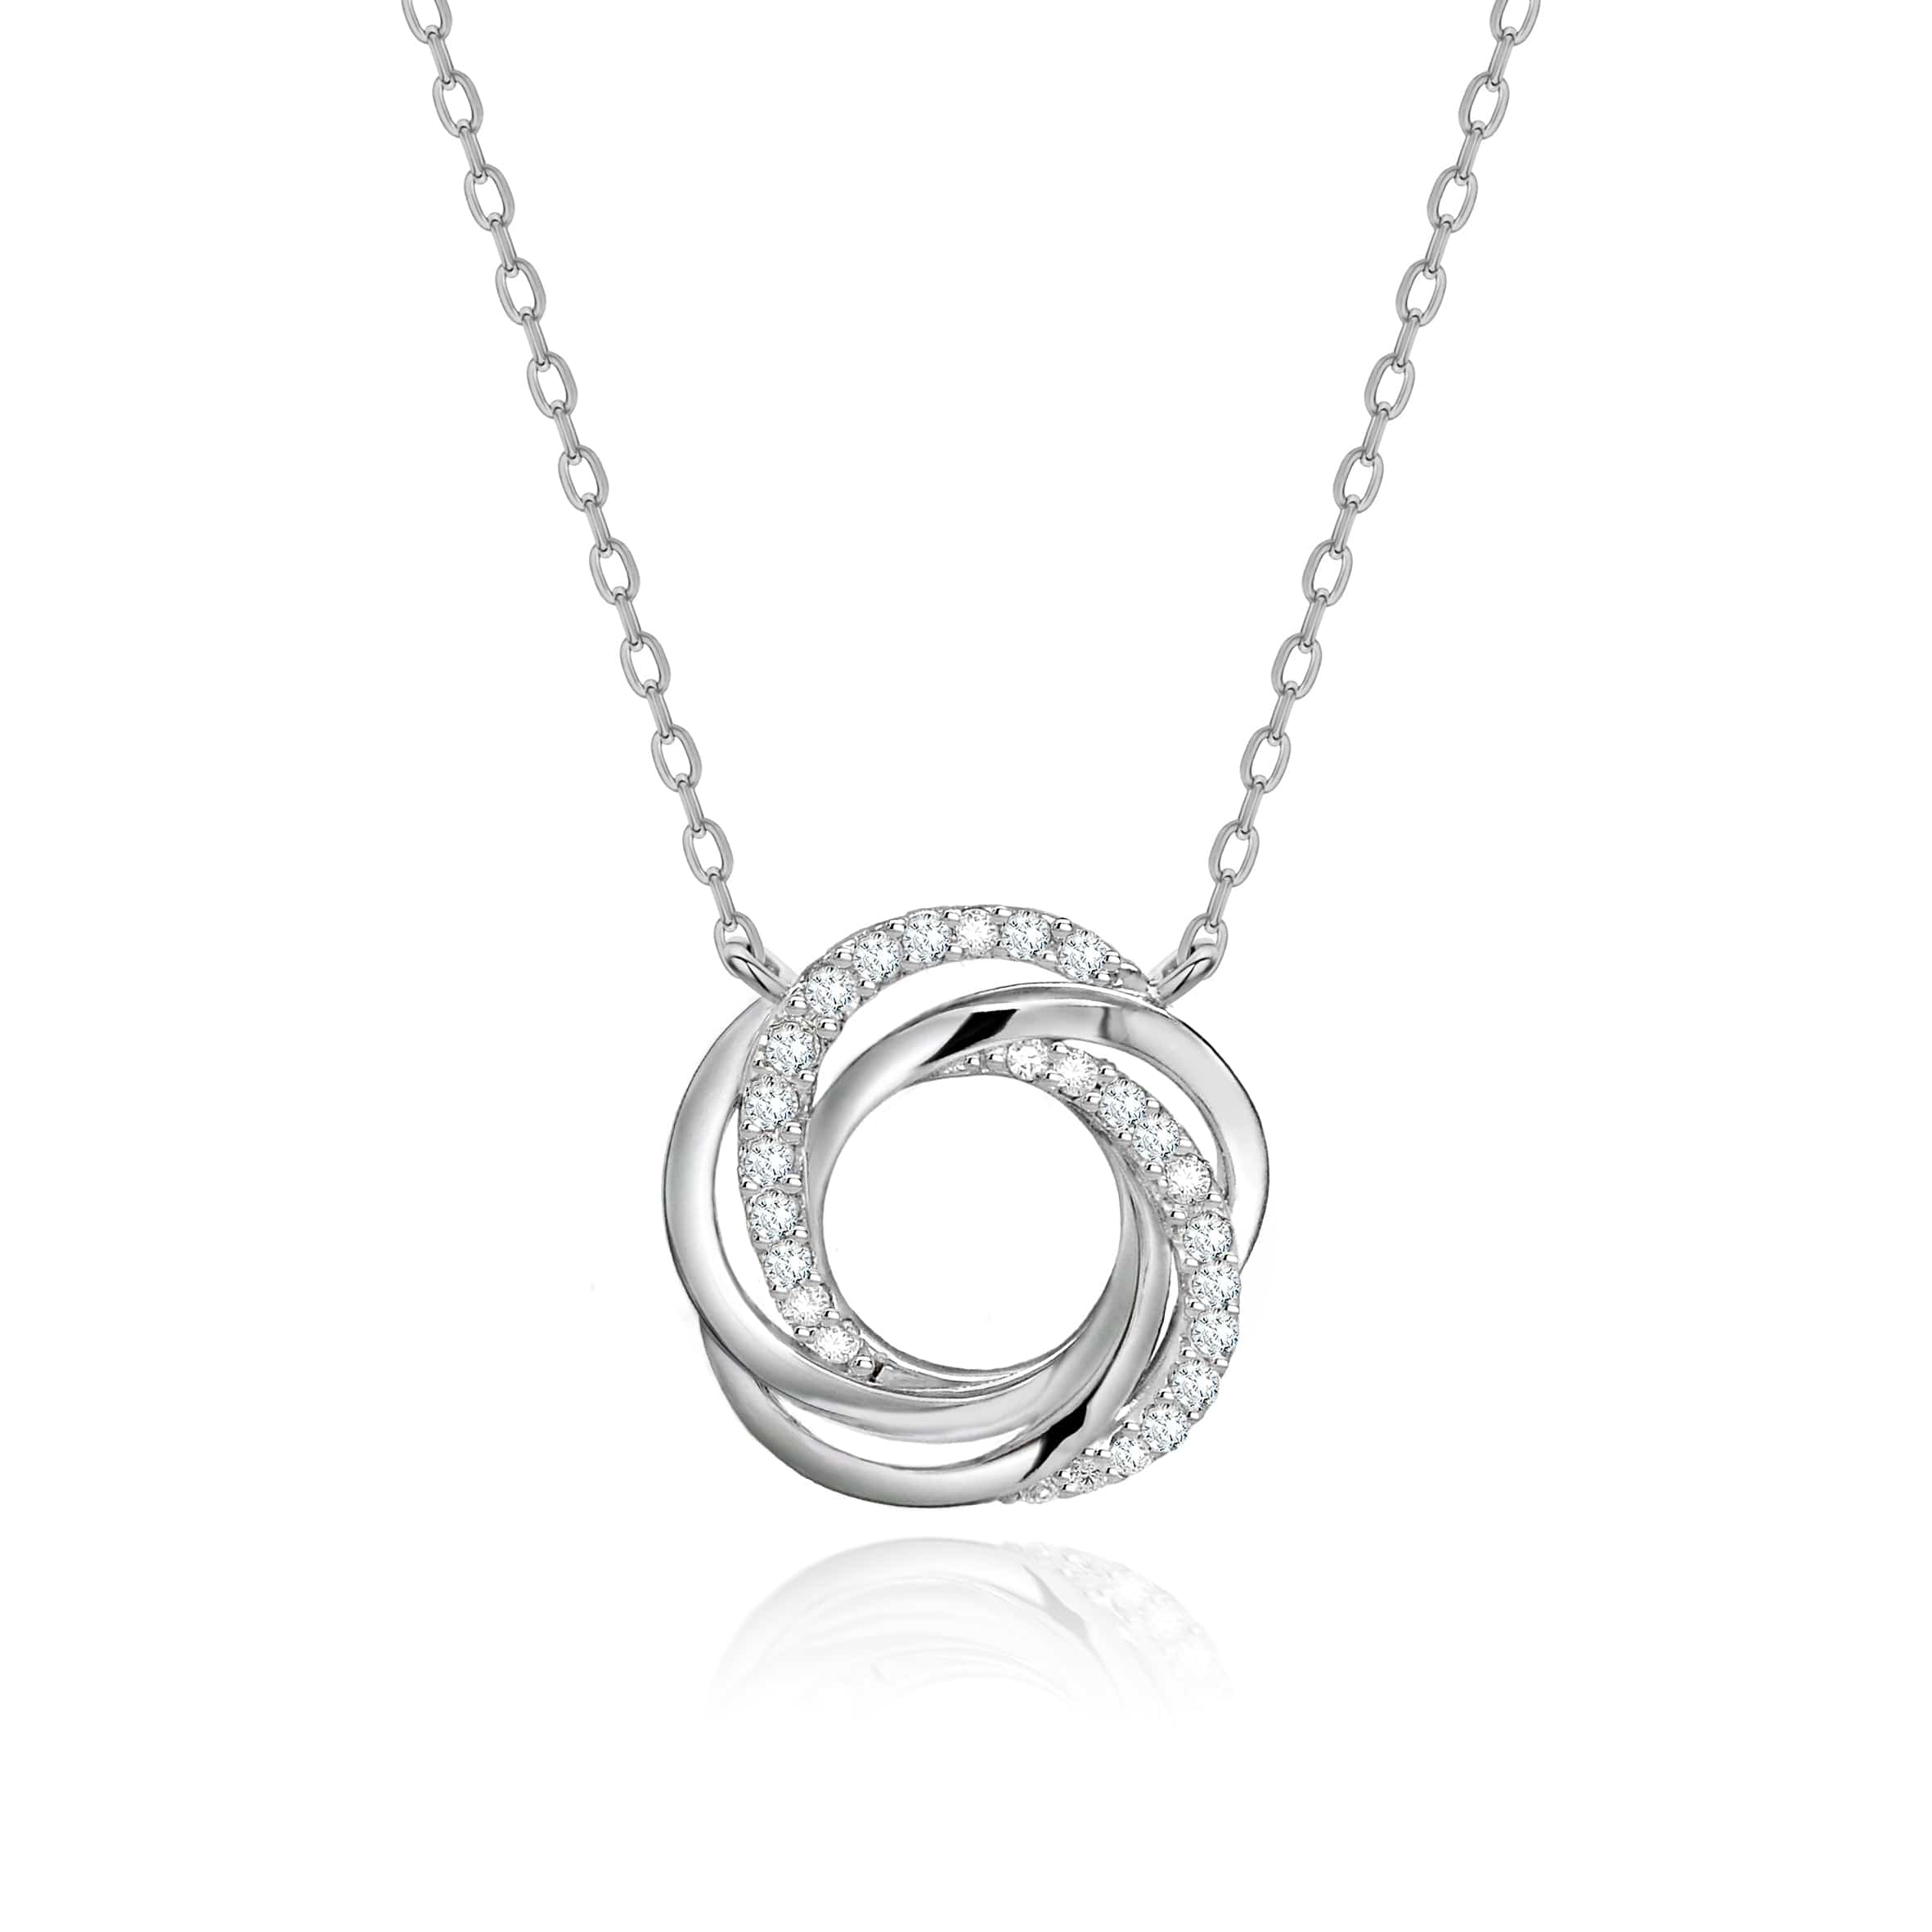 Lynora Silver Pendant Sterling Silver / Clear Entwine Circle Pendant